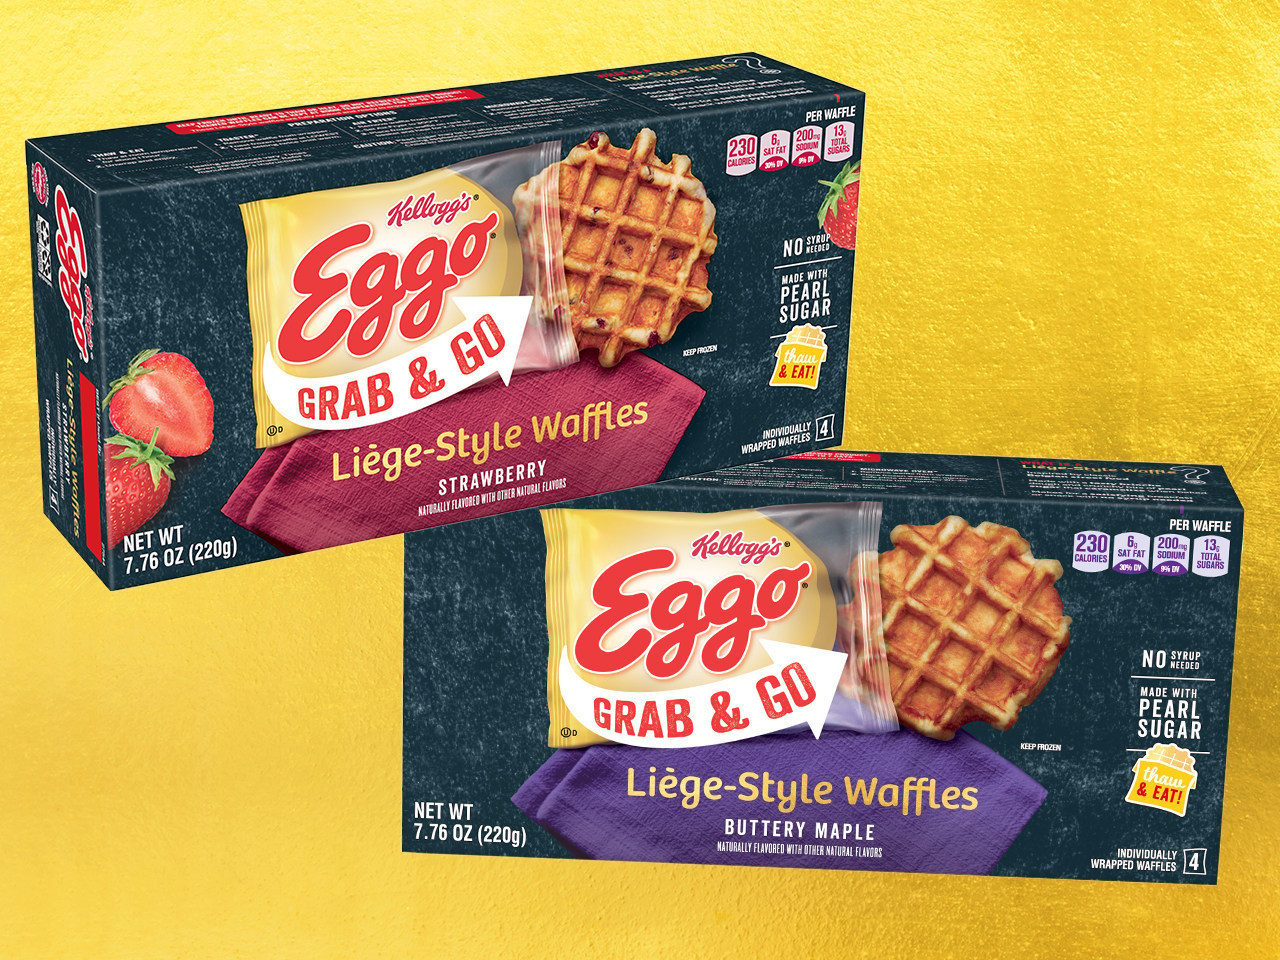 Boxes, Product line, Liege-style waffles, Waffles, Strawberries, Font